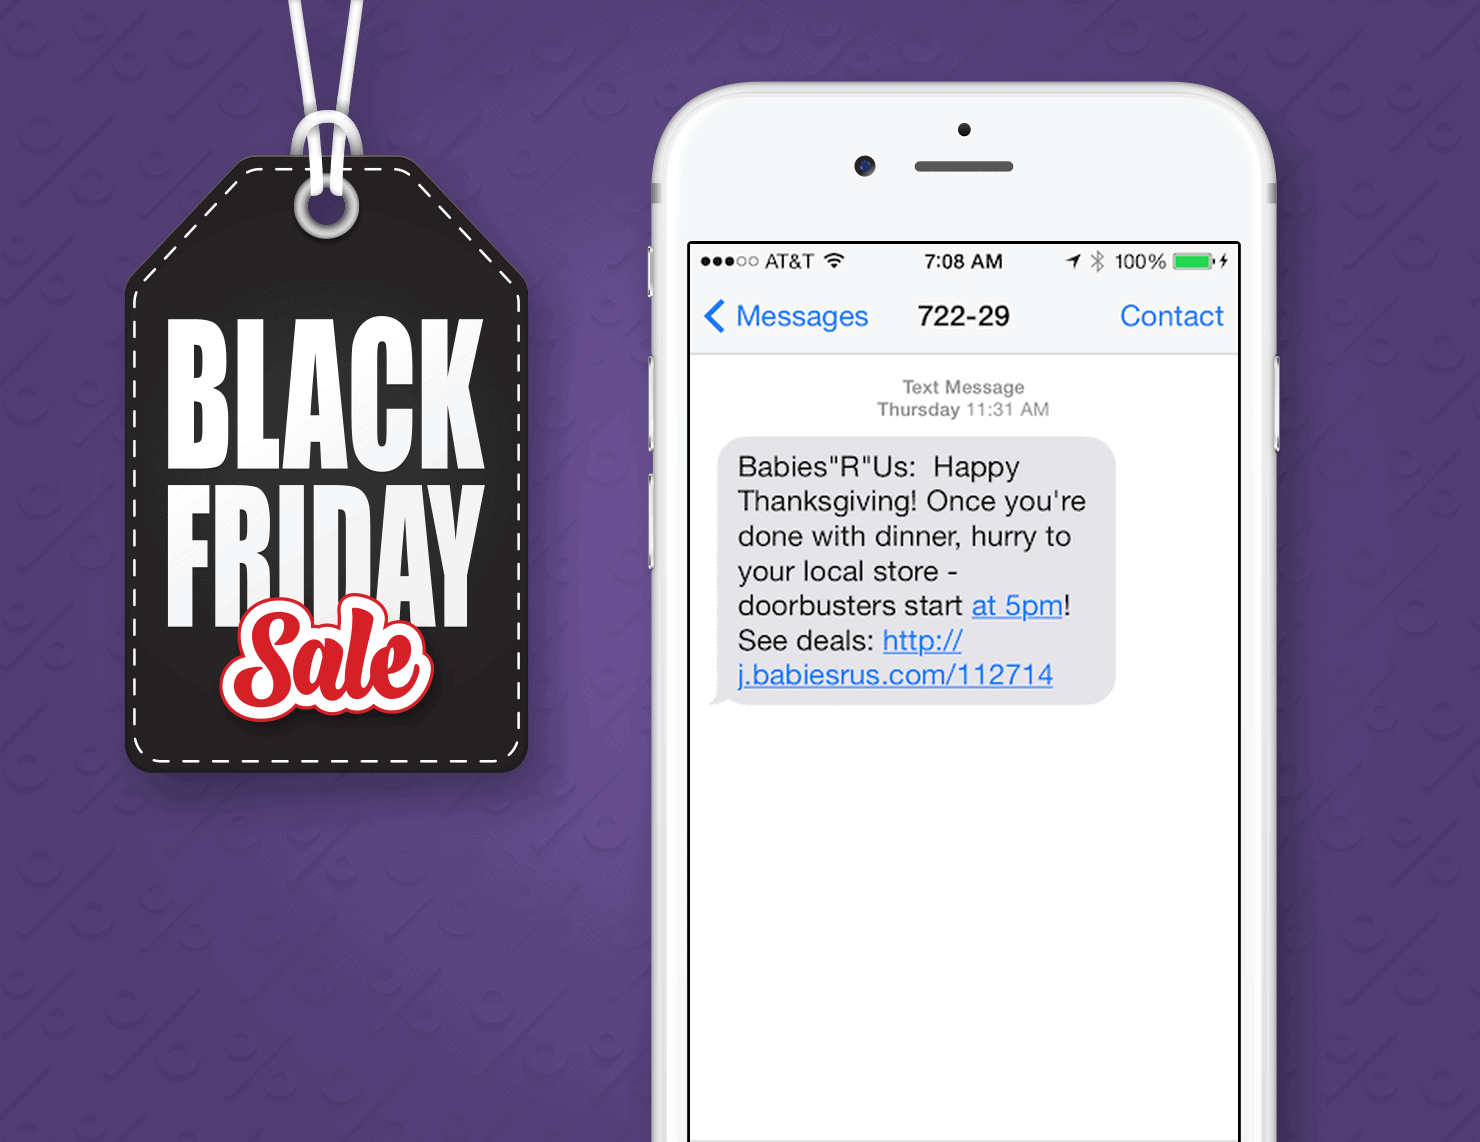 Black Friday SMS Marketing Example From Babies-R-Us